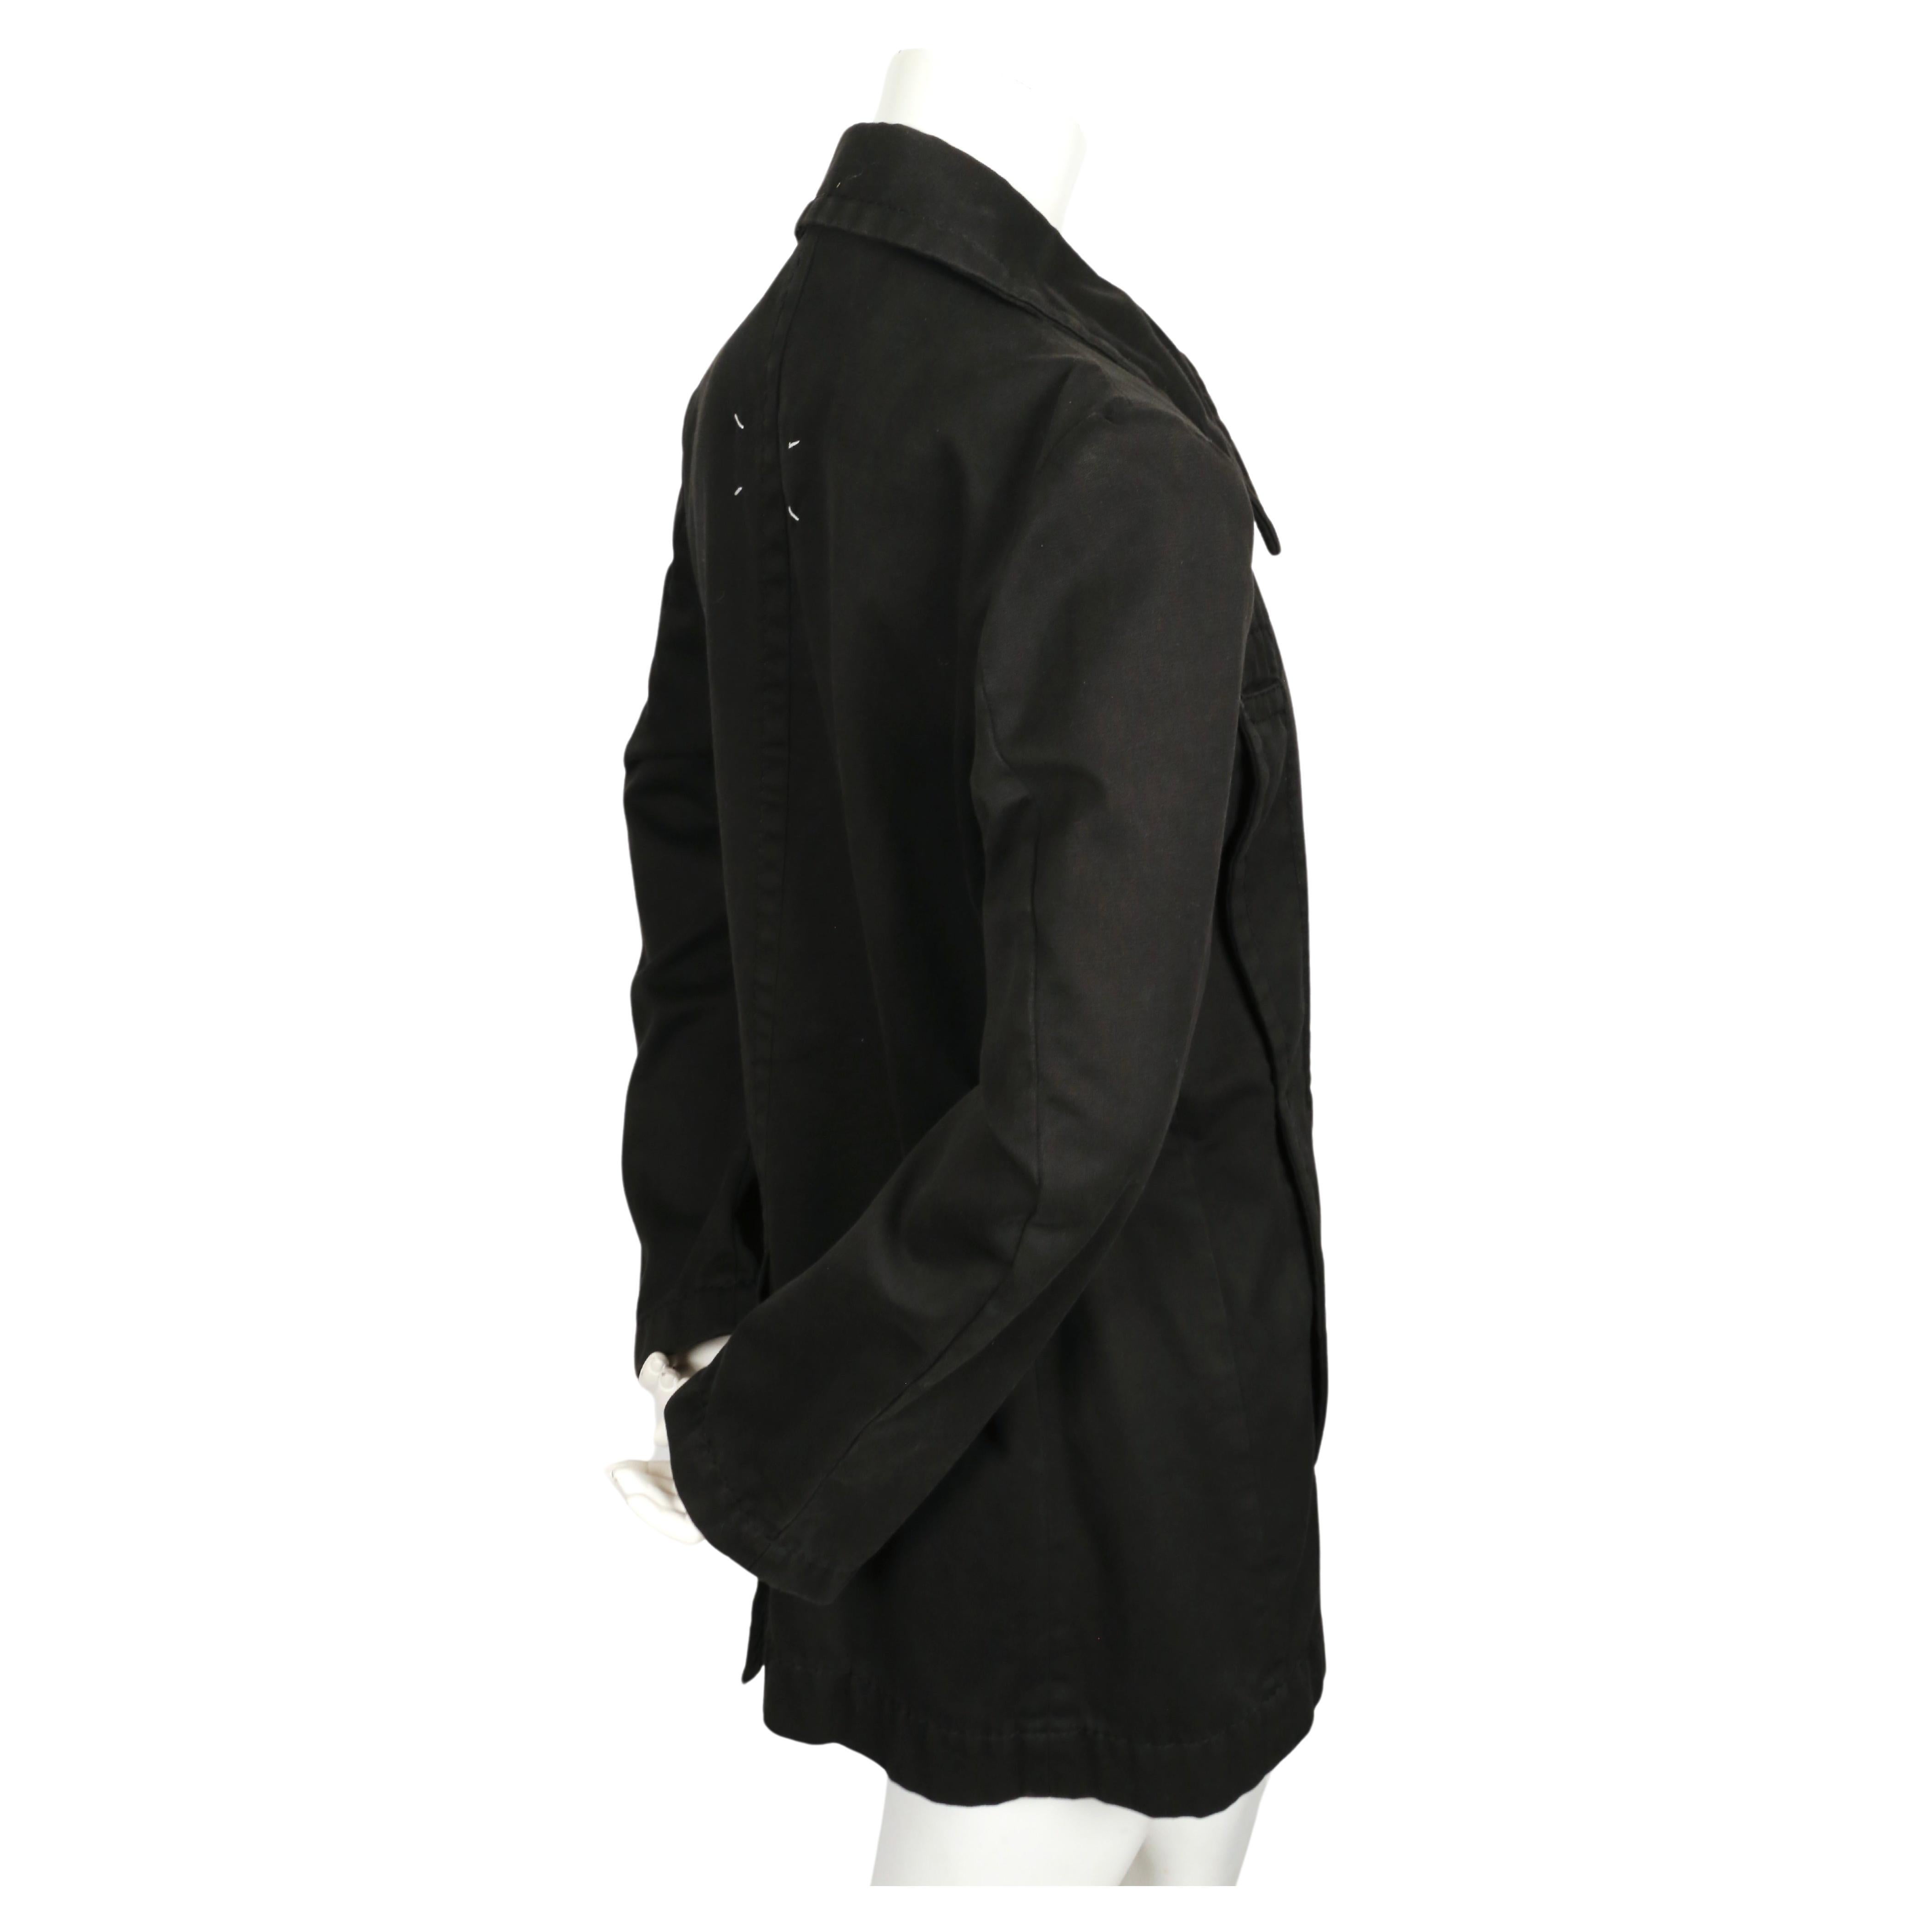 Vintage 1996 MARTIN MARGIELA black runway coat with 'elongated' pockets In Good Condition For Sale In San Fransisco, CA